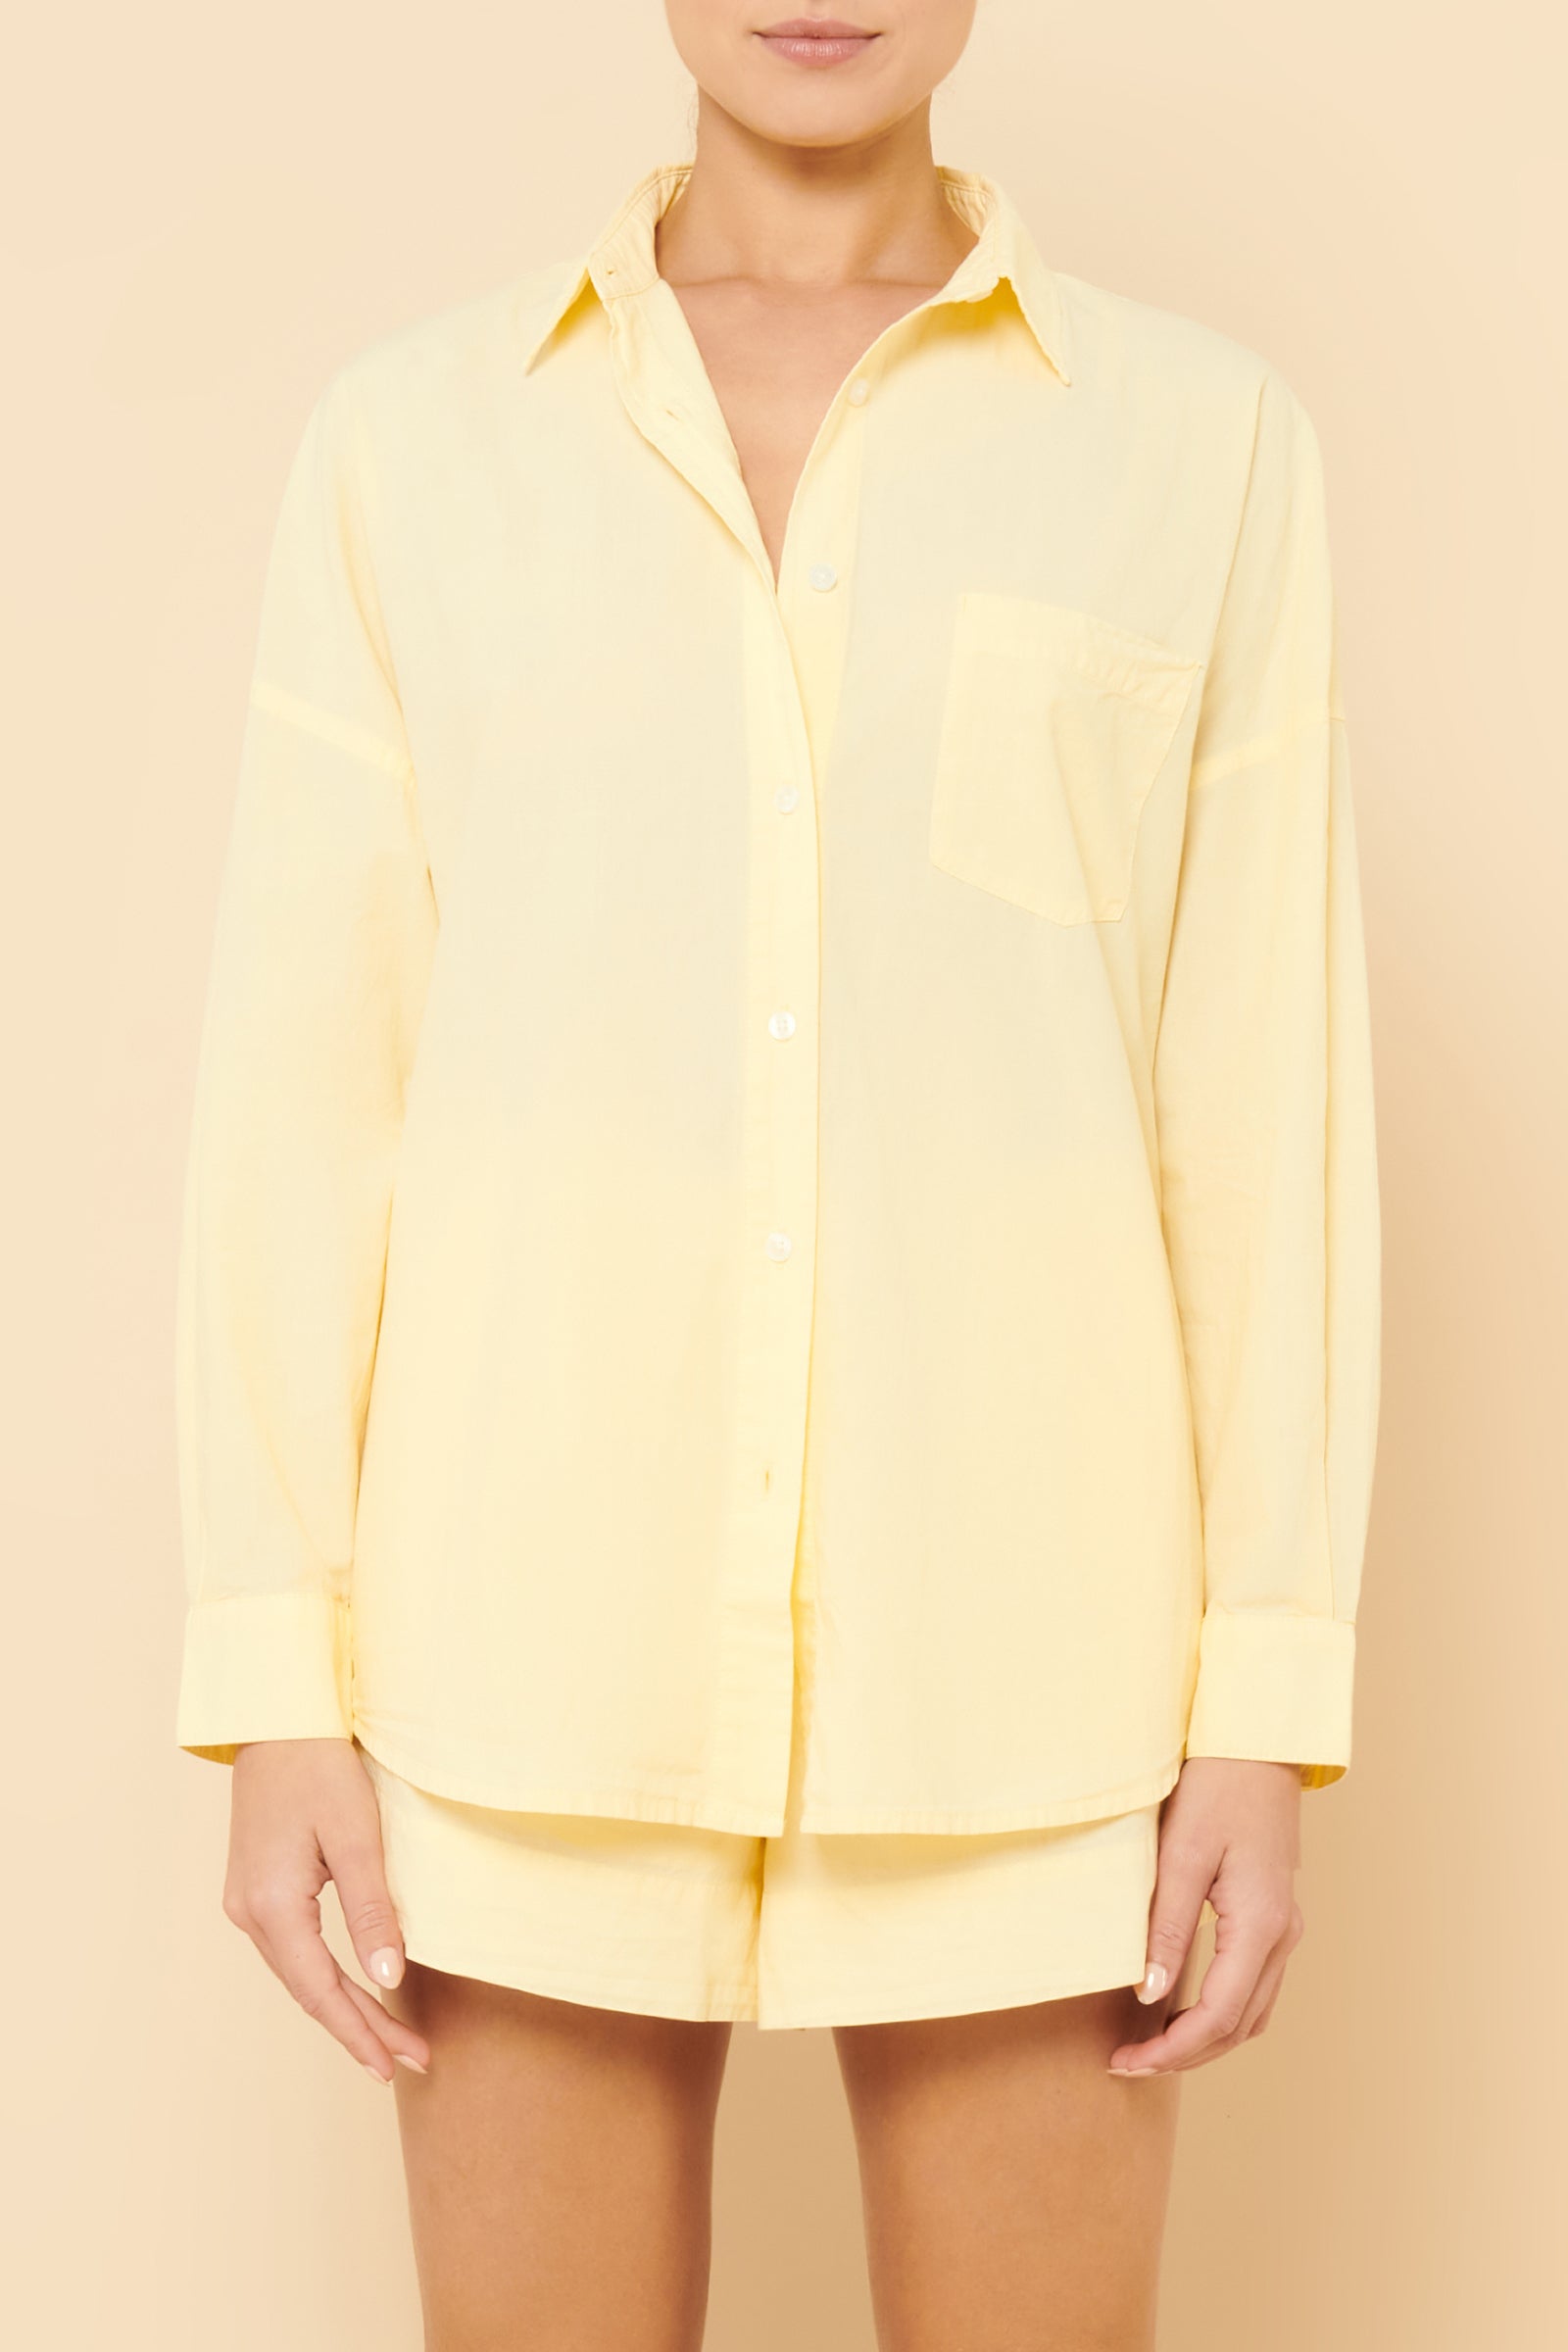 Nude Lucy Naya Washed Cotton Shirt In A Yellow Lemonade Colour 